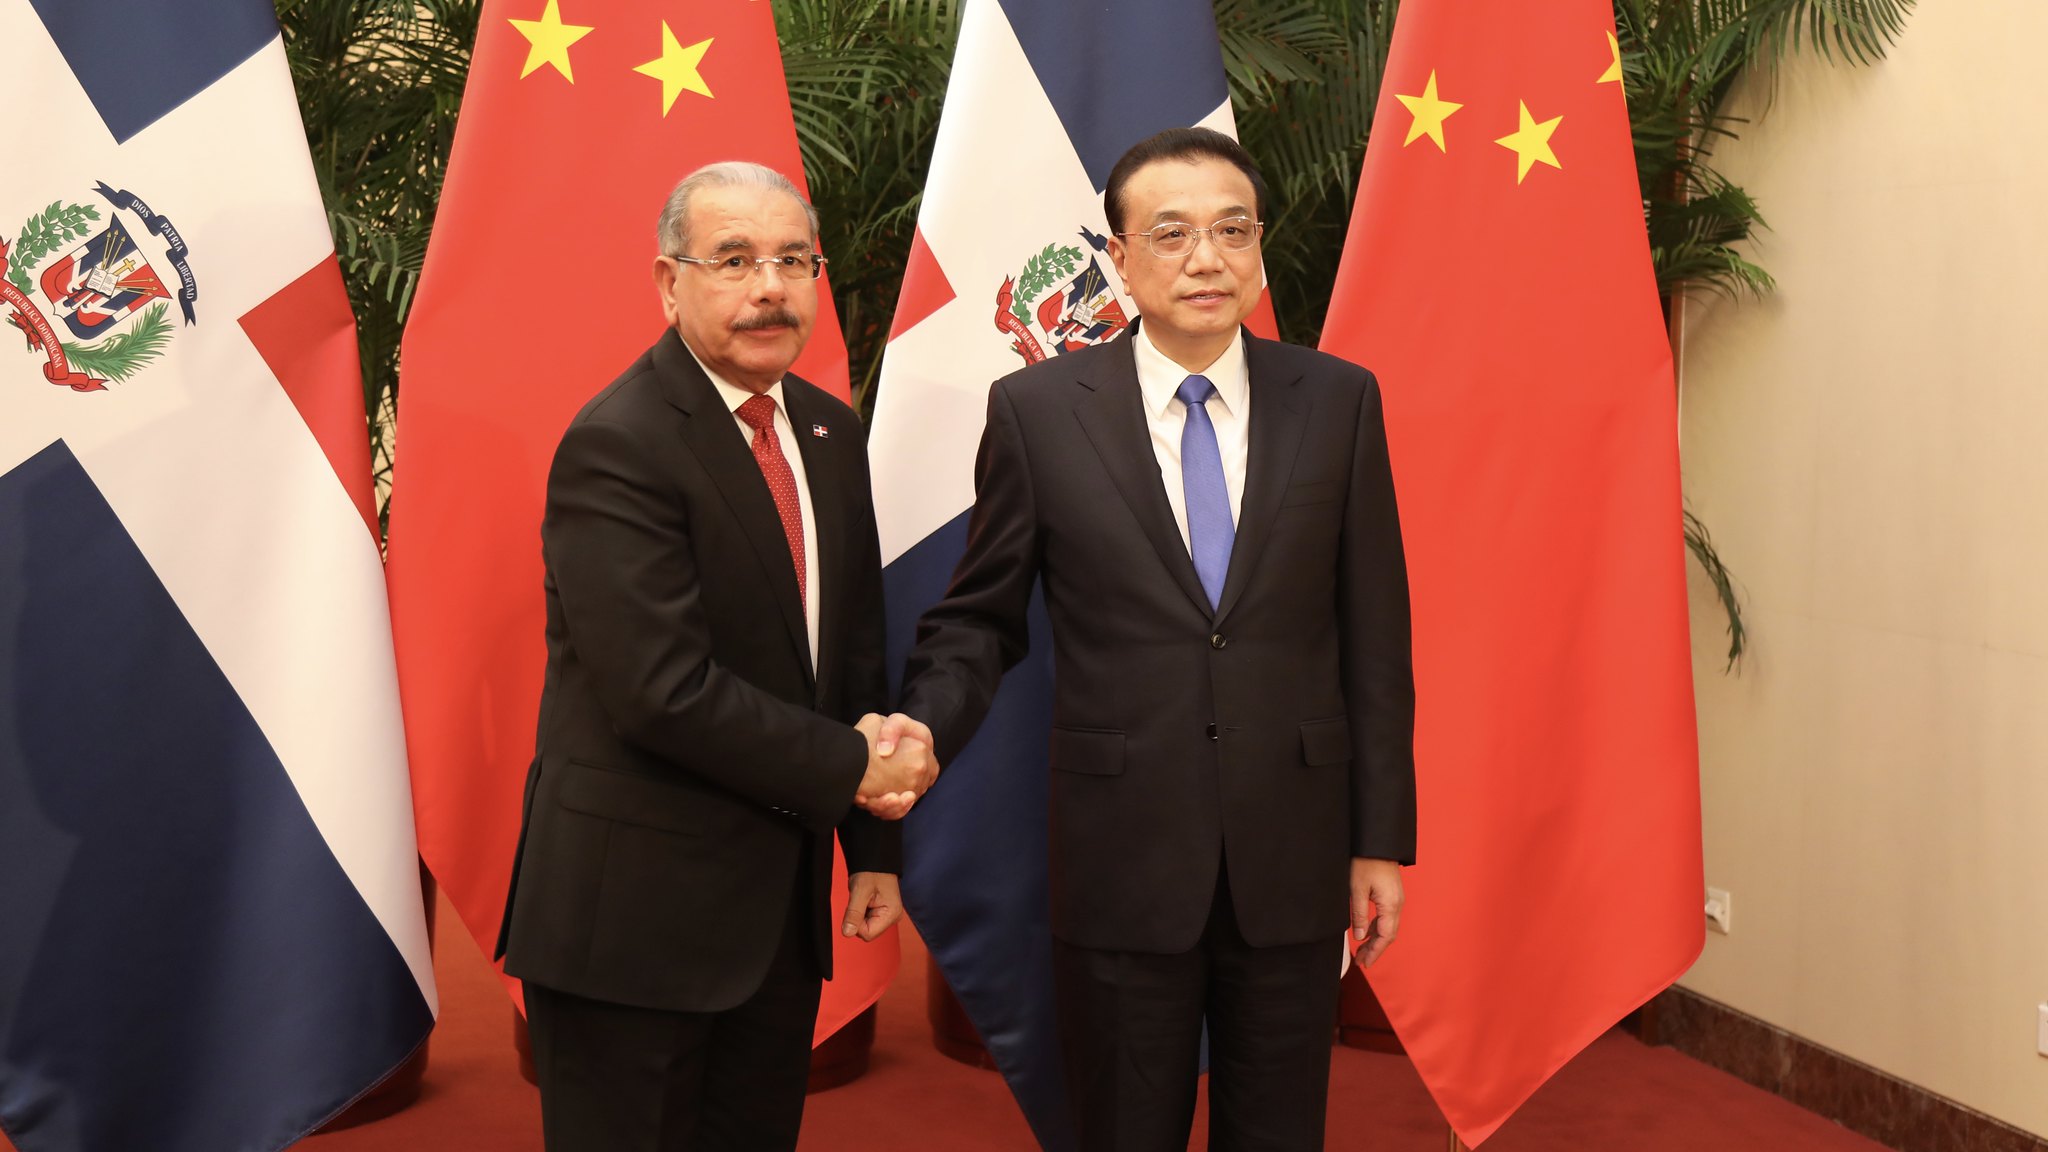 two men in suits and ties shake hands with flags of the Dominican Republic and China behind them.